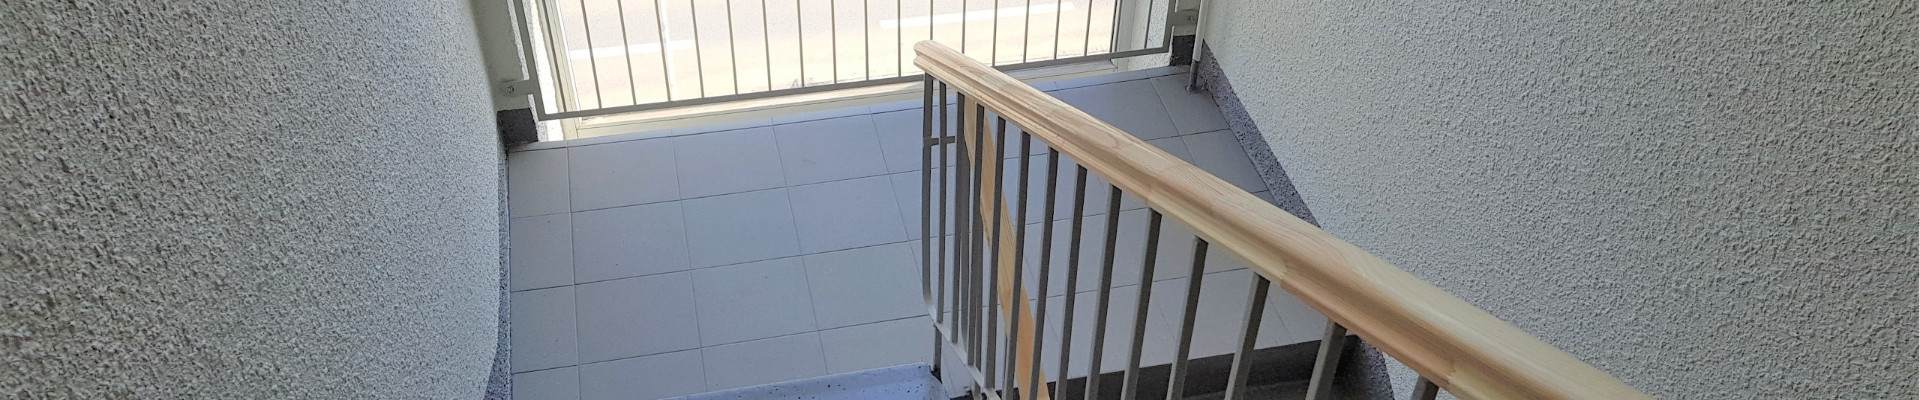 painting the stairs of an apartment building, Construction, Construction, large-scale paintwork, the doors of the electrical switchboard in the apartment building, painting and renovation of facades, general contractor for construction, tiling, handrails of apartment building, facade work